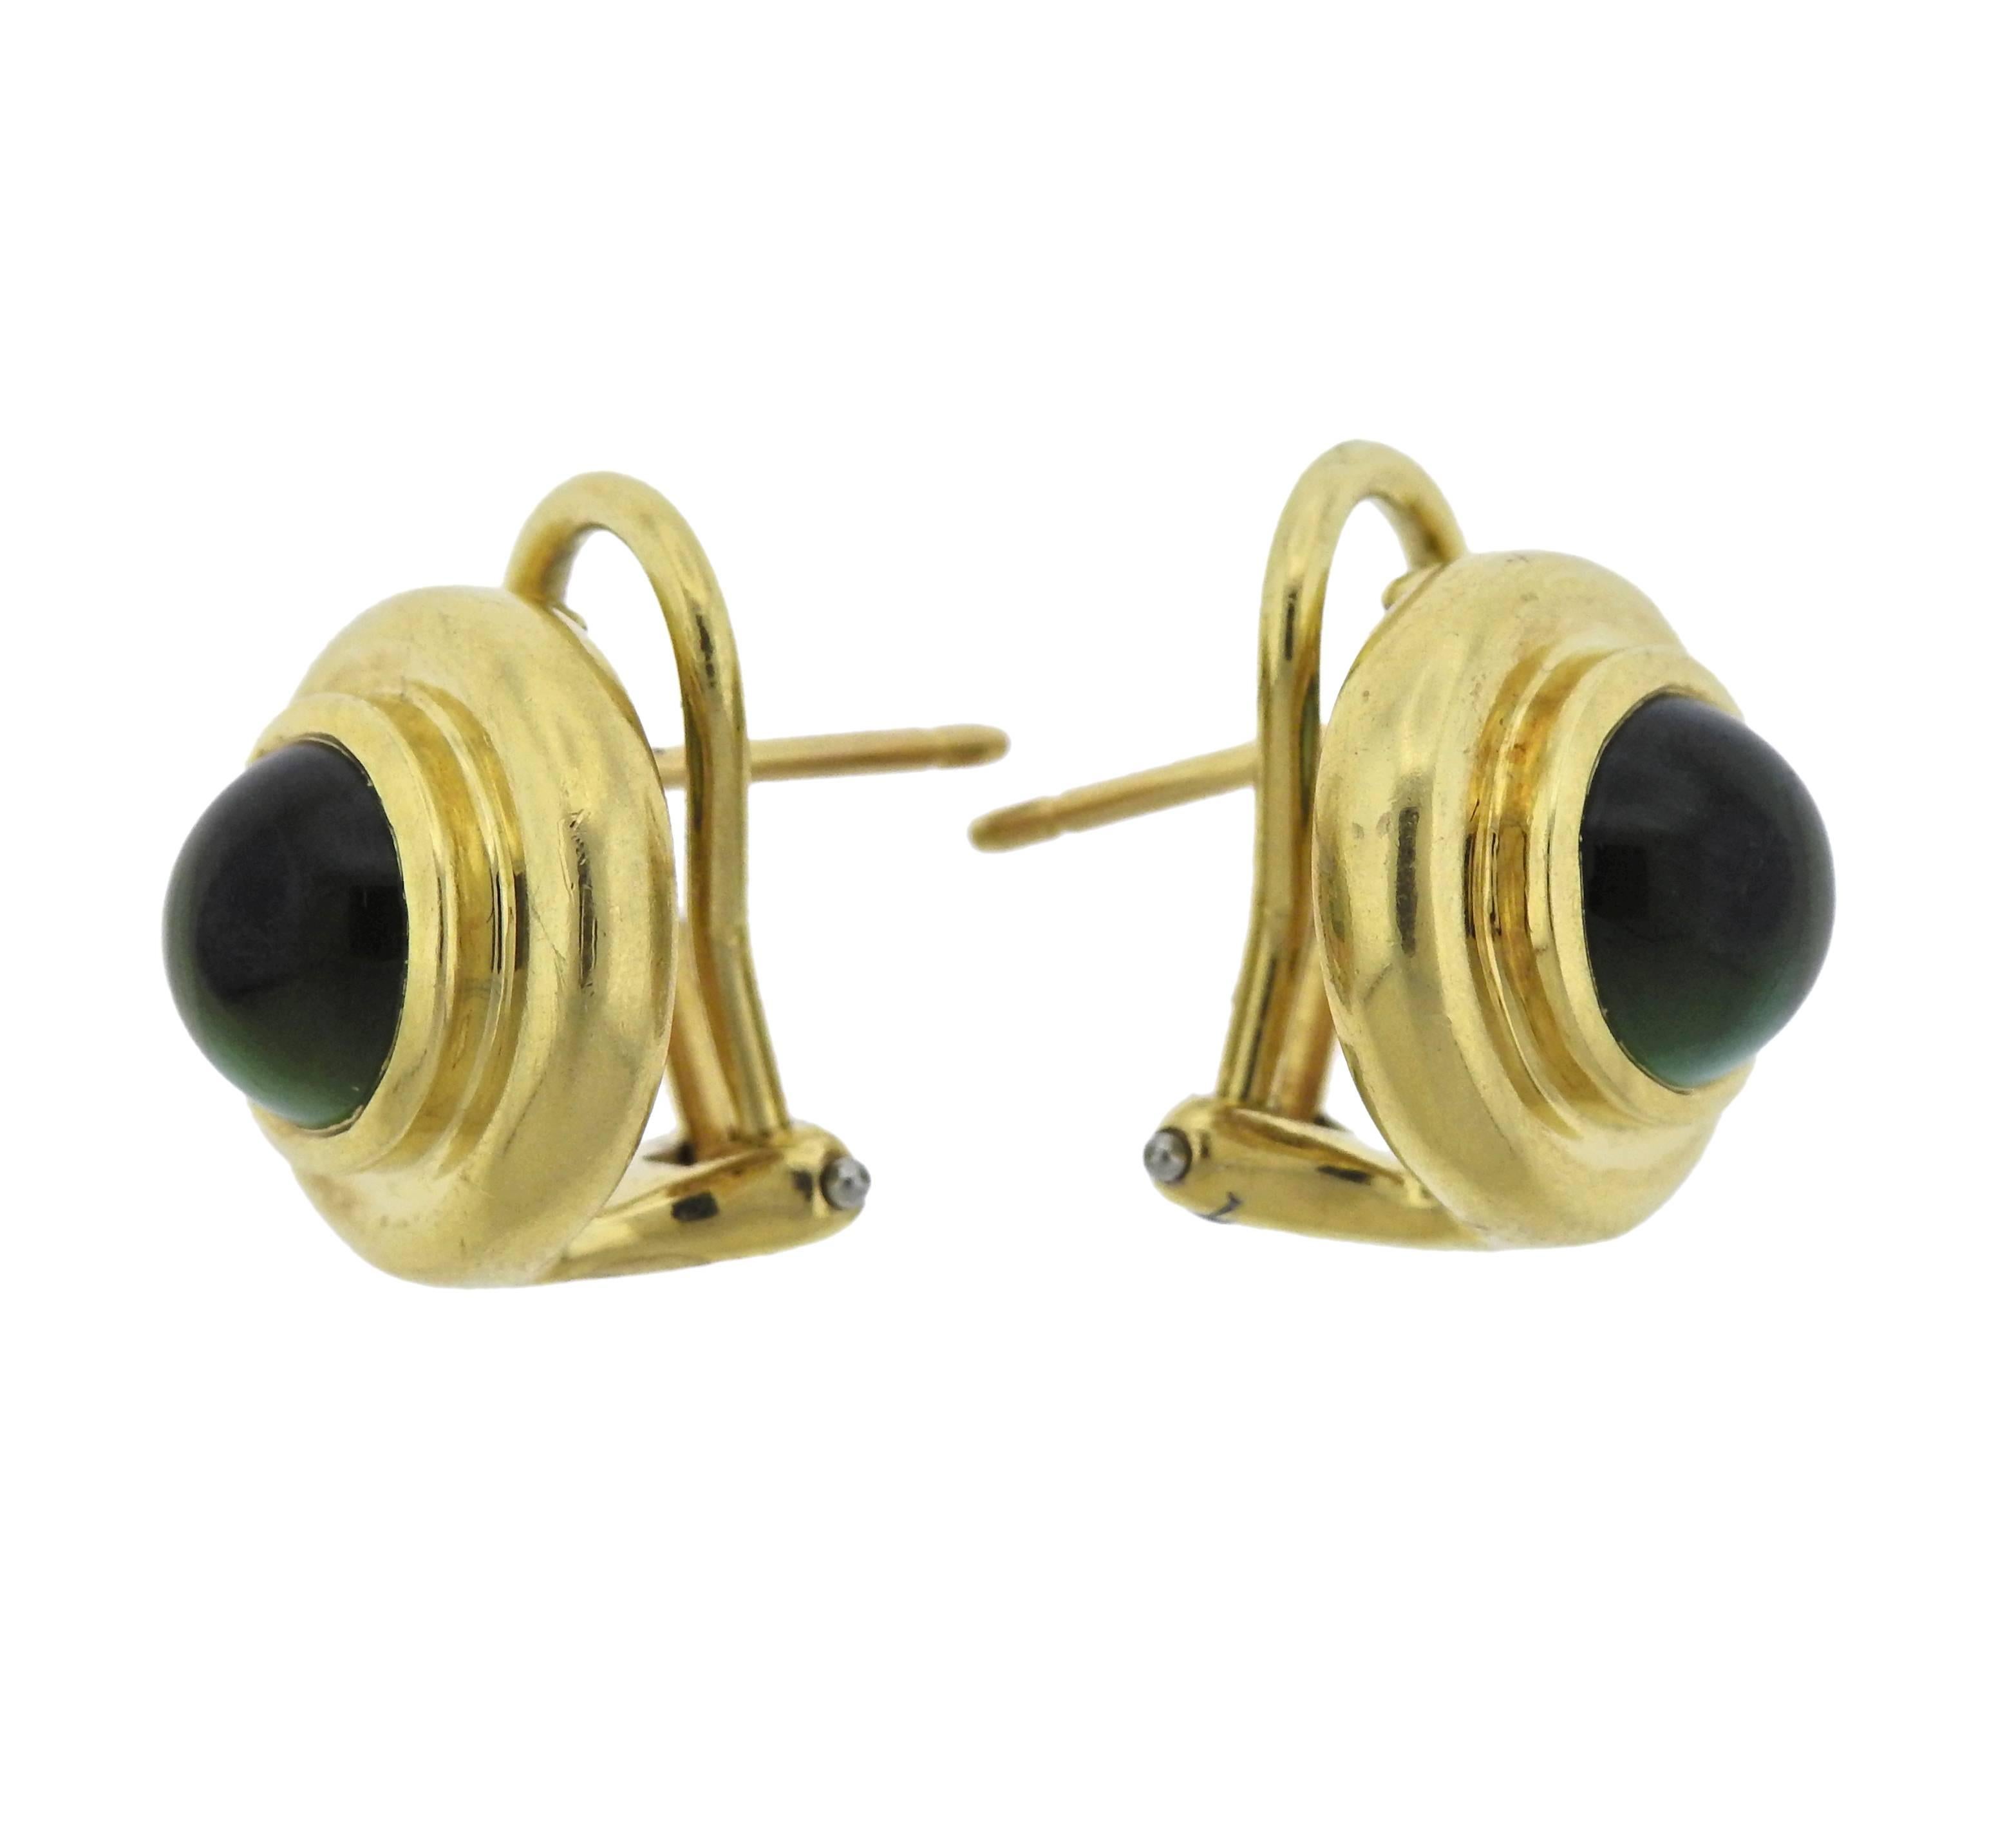 Pair of 18k yellow gold and 7.5mm green tourmaline button earrings, crafted by Paloma Picasso for Tiffany & Co.  Earrings are 13.5mm in diameter, weigh 9.9 grams. Marked: Tiffany & Co, Paloma Picasso, 750.